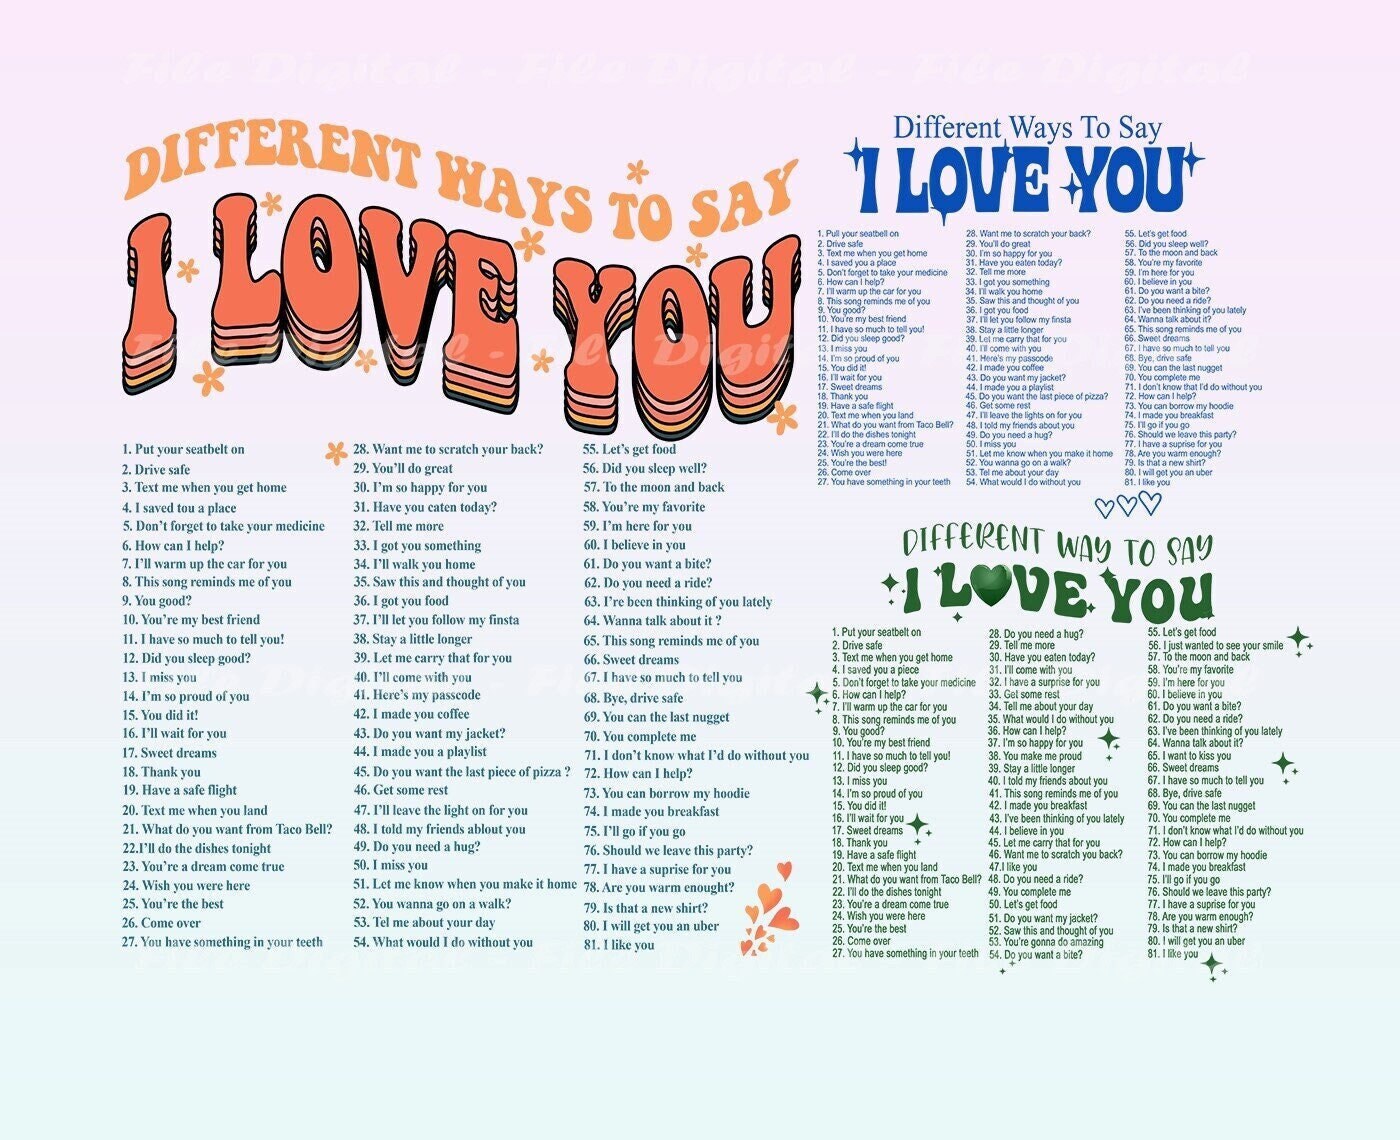 Aesthetic File Different Way To Say Love You File Digital Different Way To Say Love You Png Way To Say Png VSCO Love File